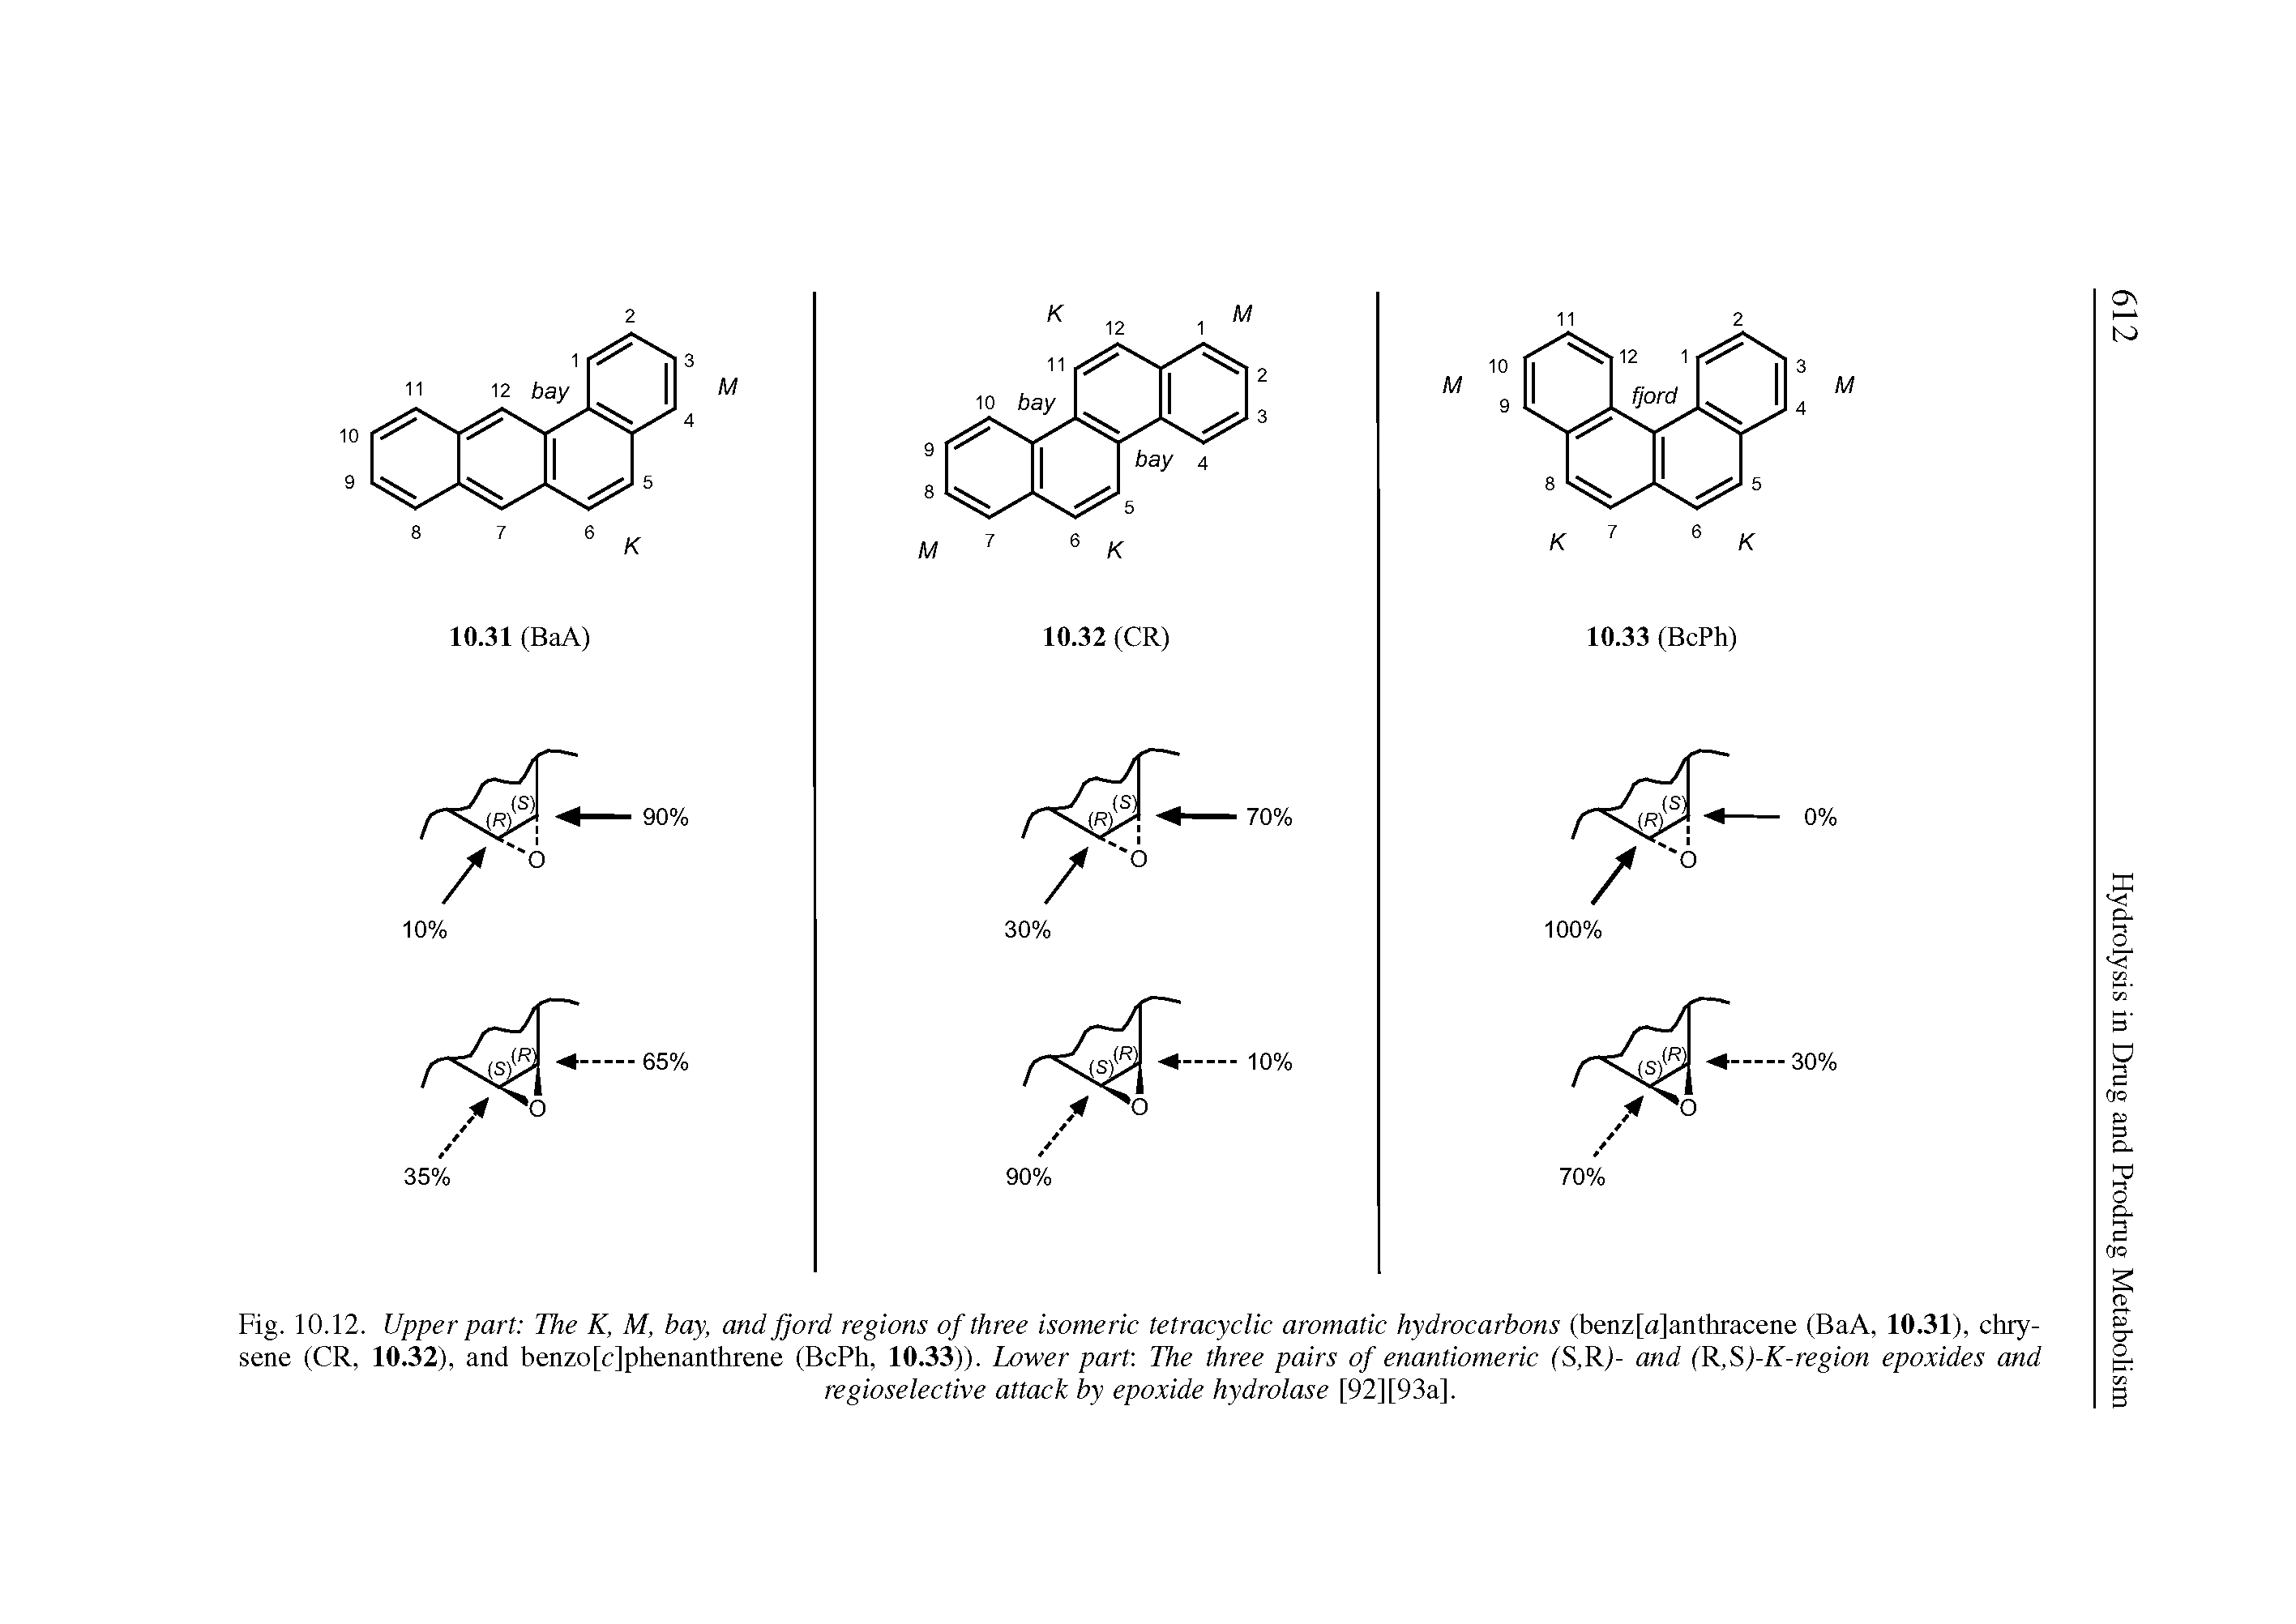 Fig. 10.12. Upper part The K, M, bay, and fjord regions of three isomeric tetracyclic aromatic hydrocarbons (benz[a]anthracene (BaA, 10.31), chrysene (CR, 10.32), and benzo[c]phenanthrene (BcPh, 10.33)). Lower part. The three pairs of enantiomeric (S,R)- and (R,S)-K-region epoxides and...